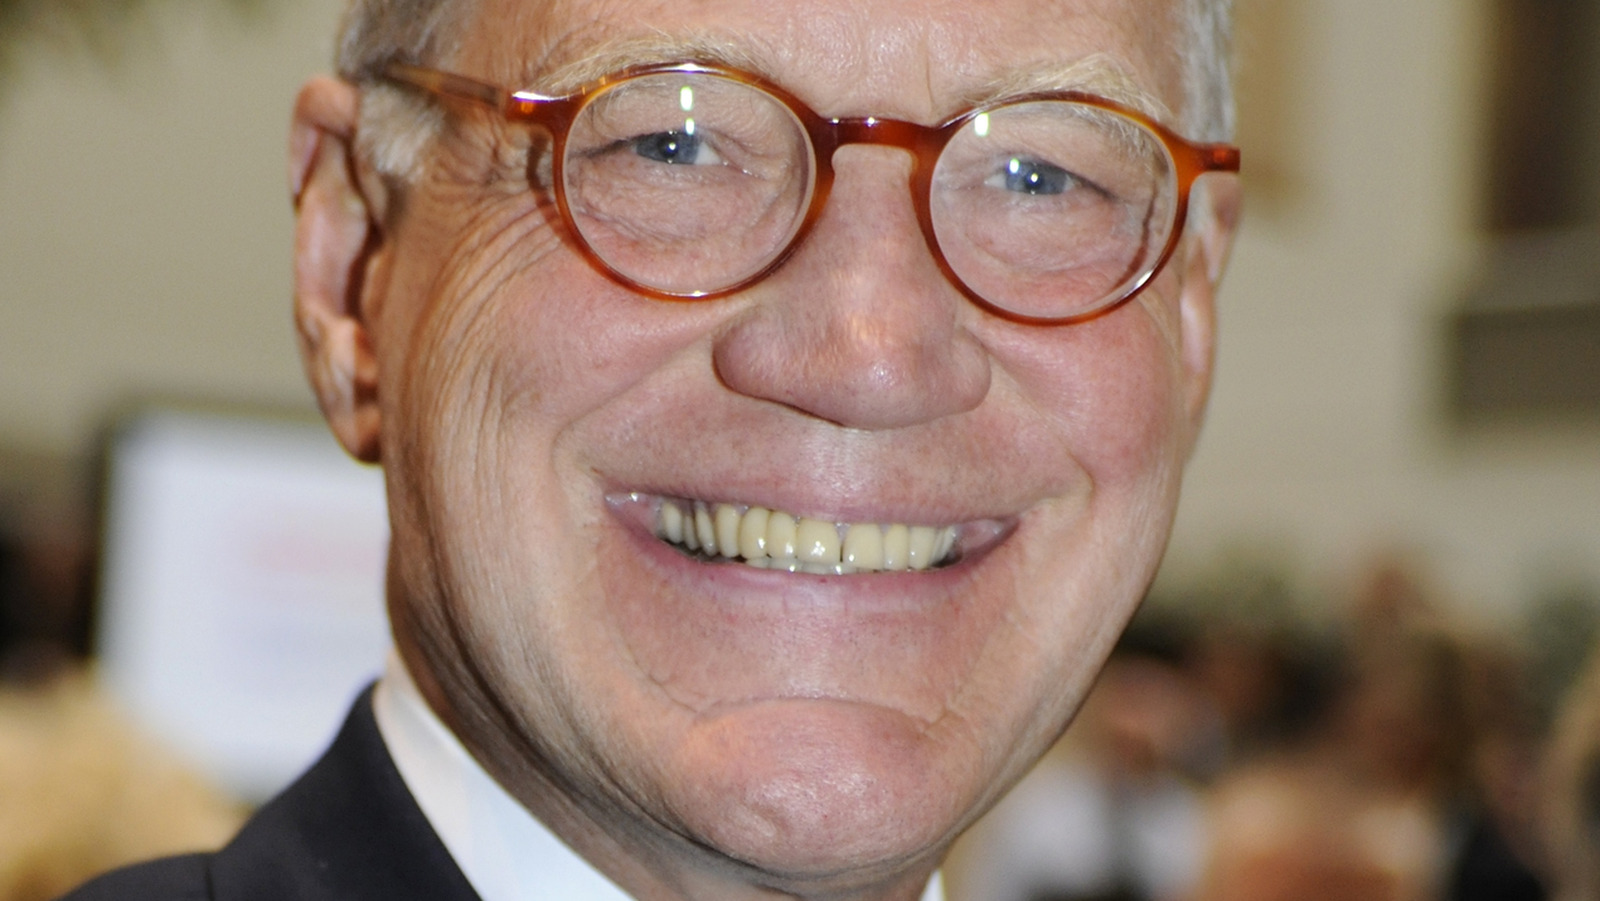 The David Letterman Cheating Scandal – Explained